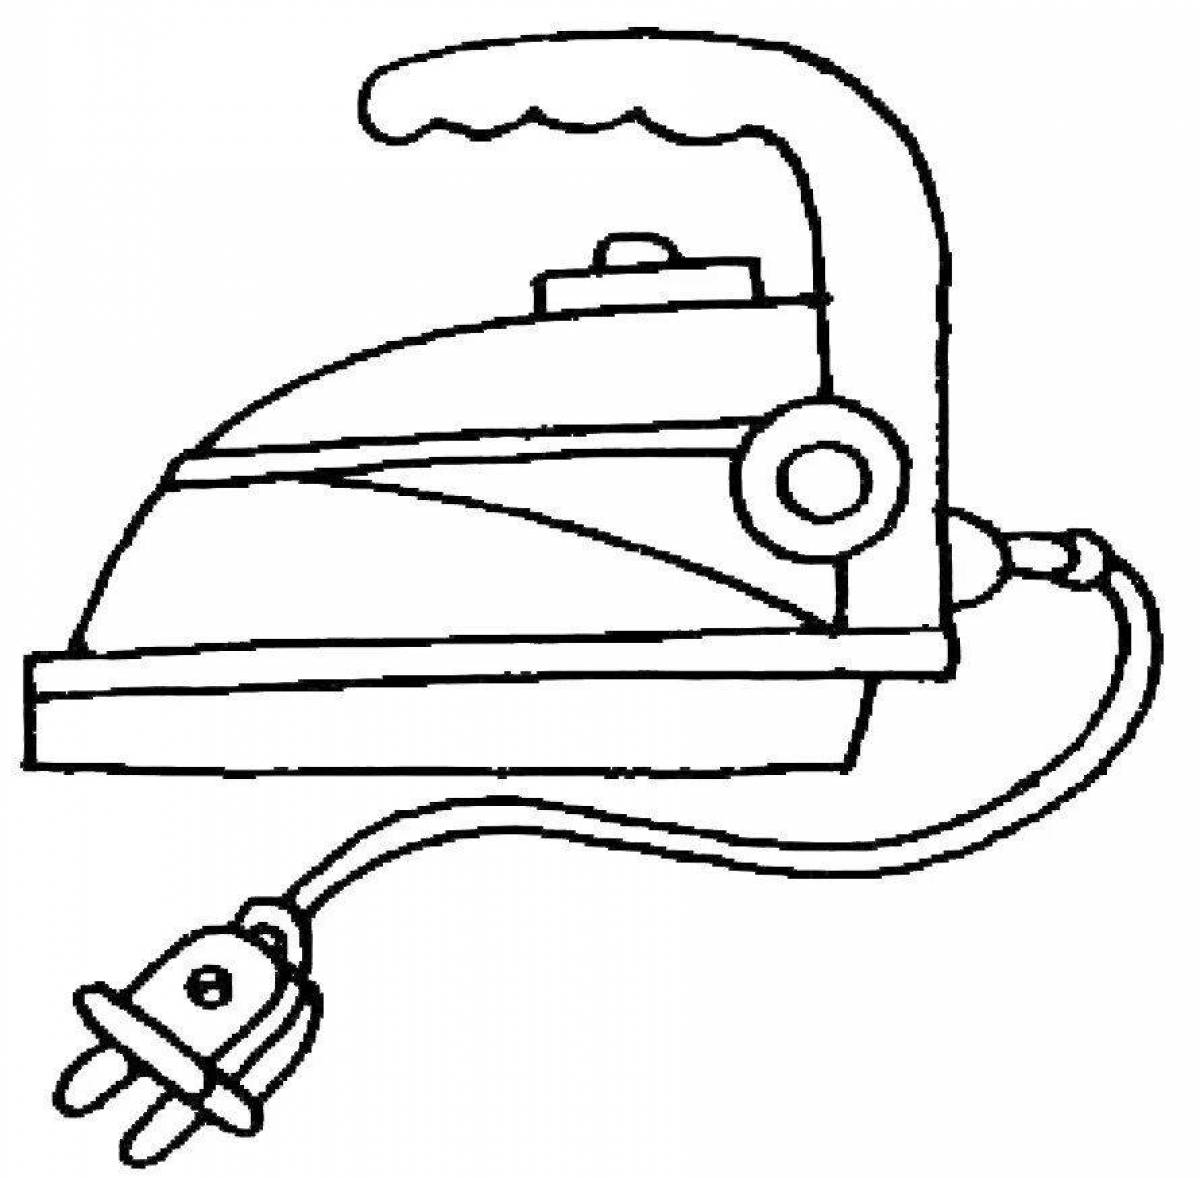 Energy appliances coloring page